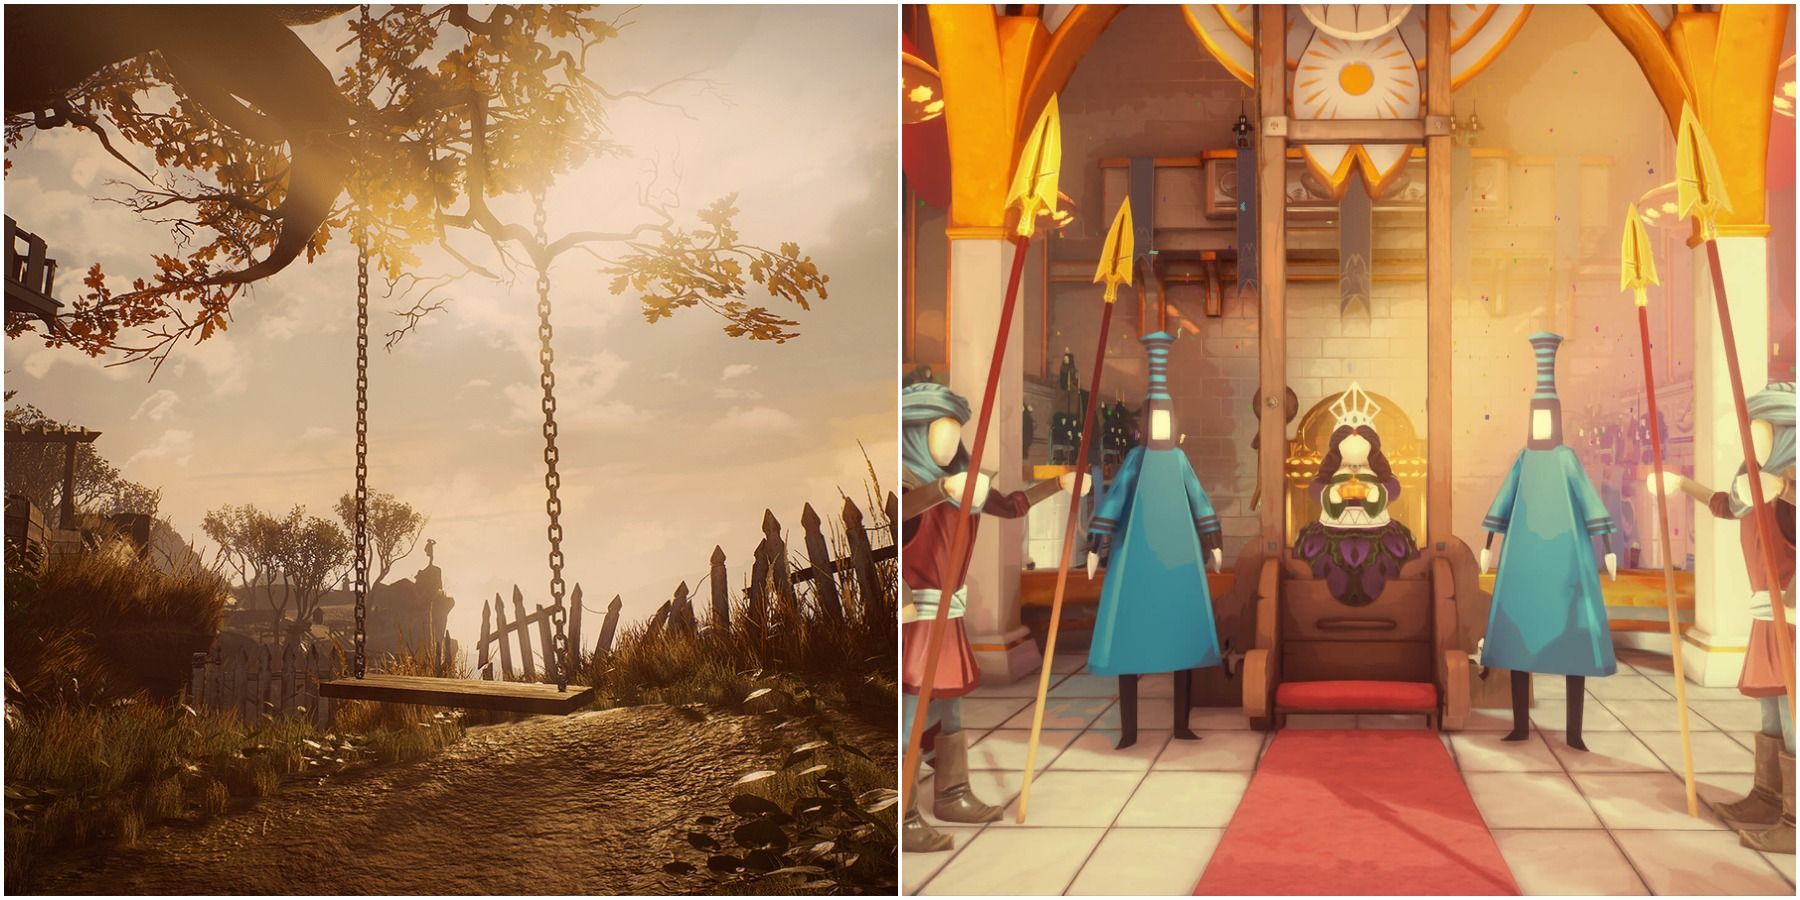 More Games Should Replicate The Magical Realism Of What Remains Of Edith Finch